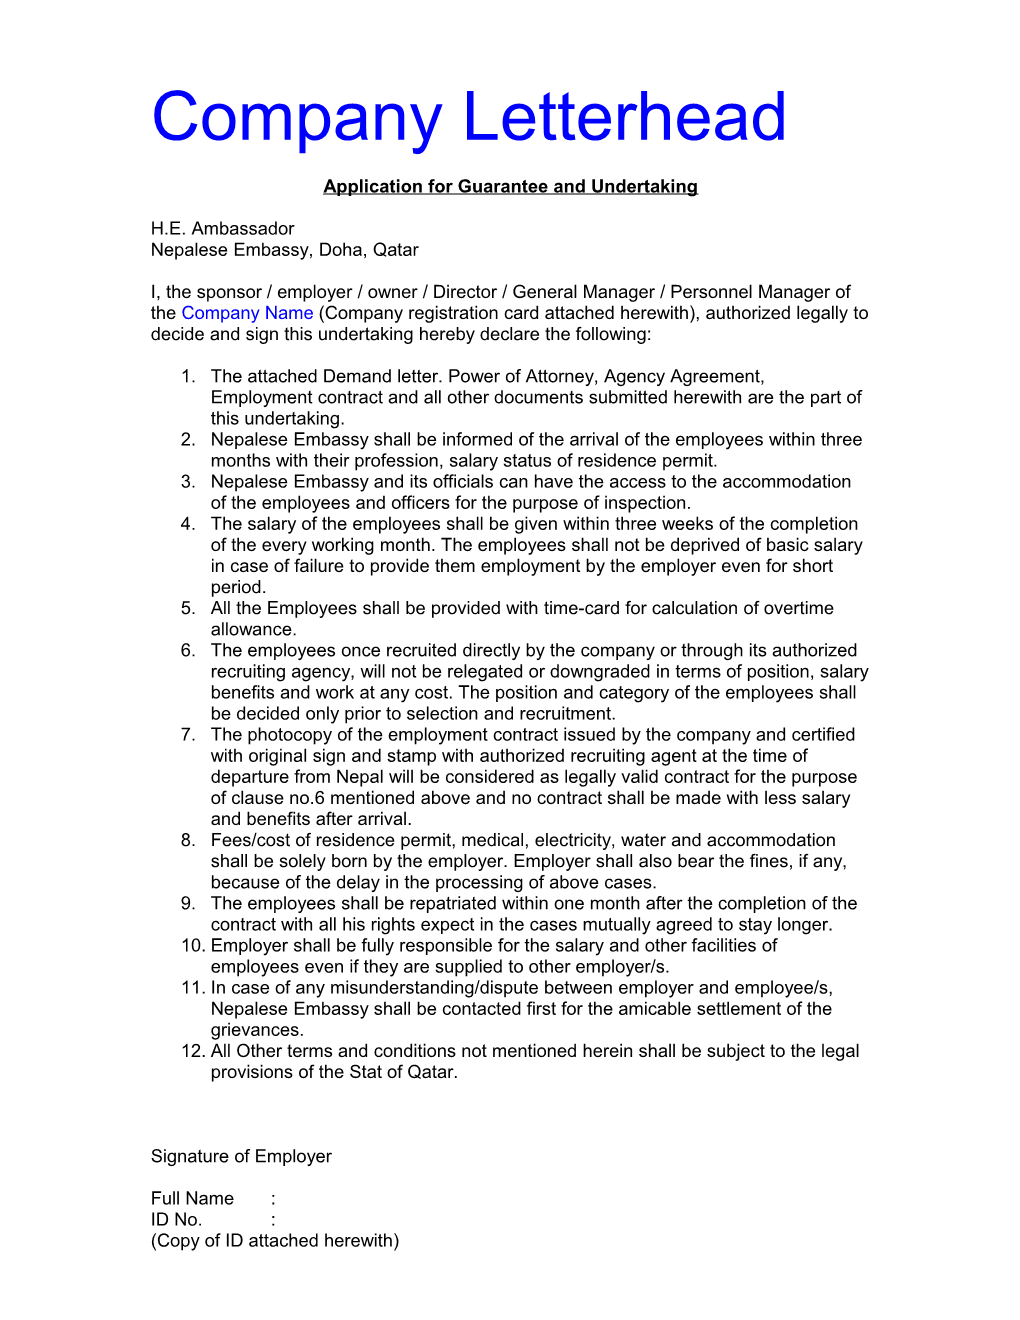 Application for Guarantee and Undertaking